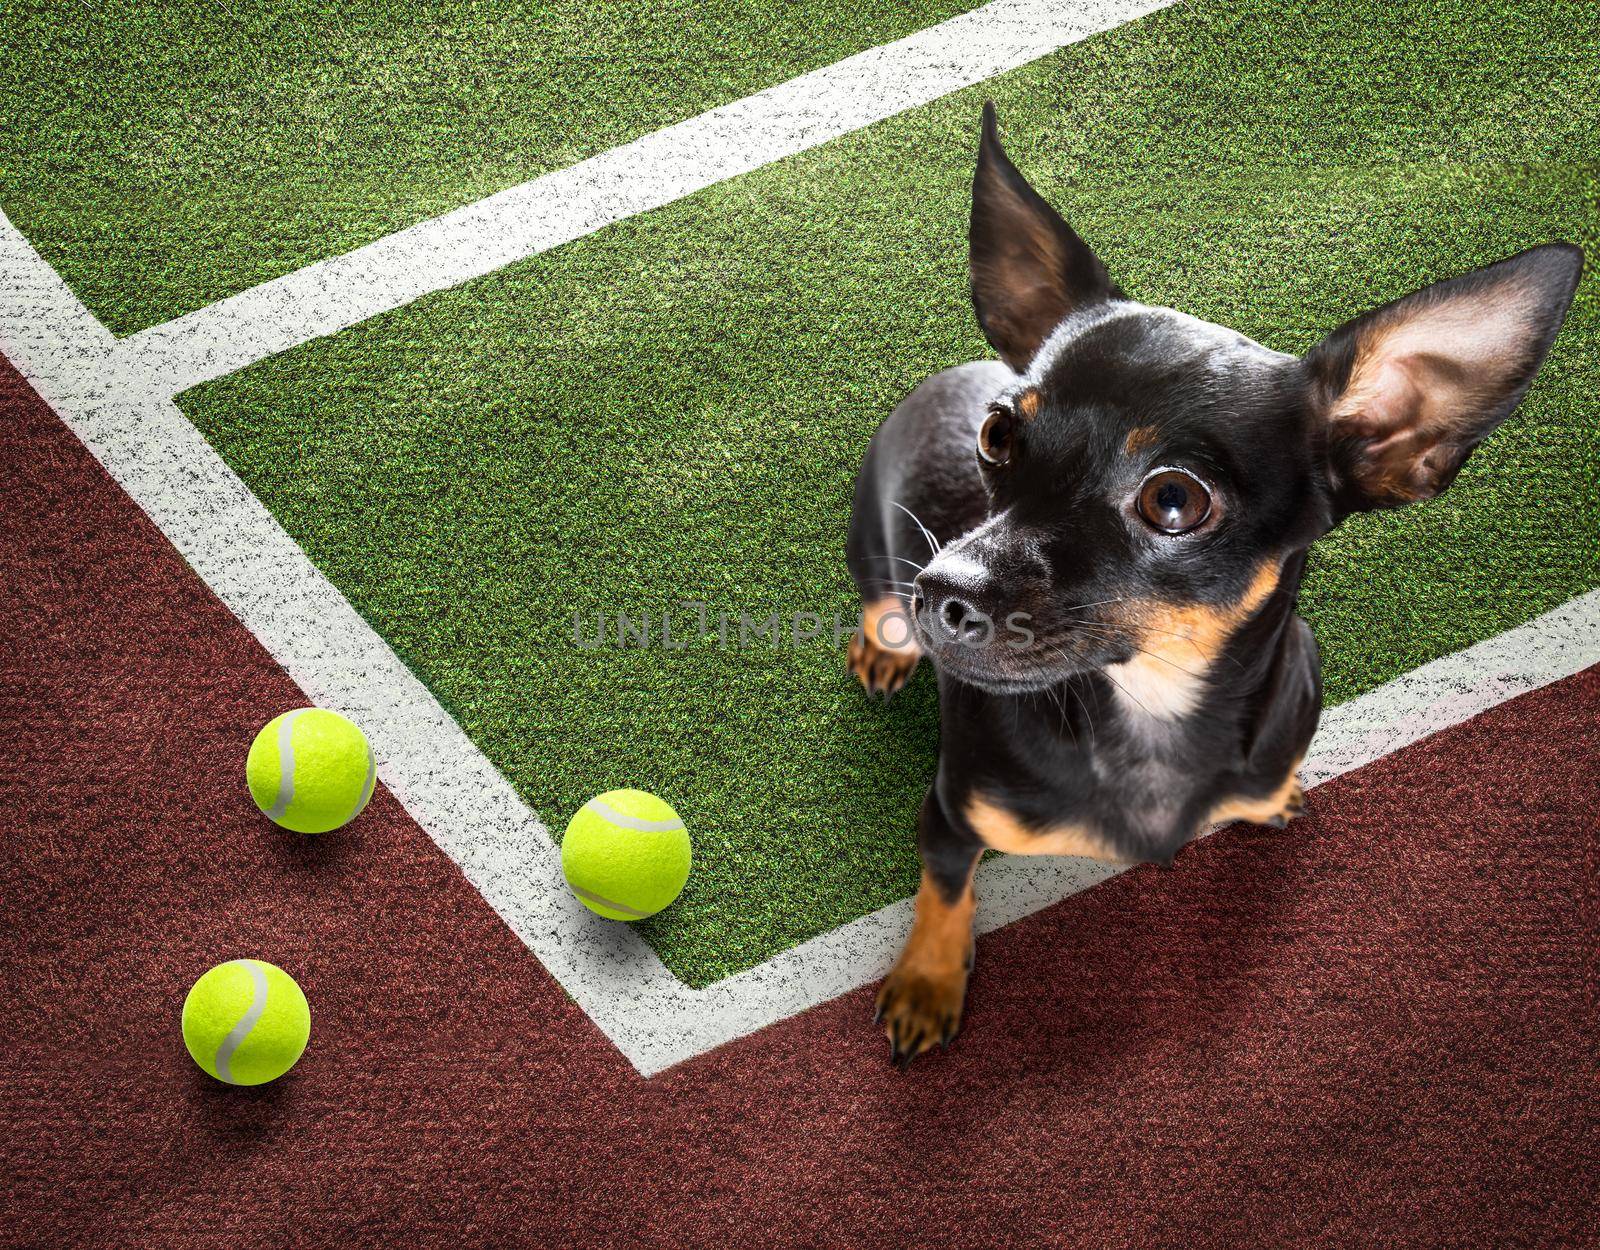 player sporty prague ratter  dog on tennis field court with balls, ready for a play or game